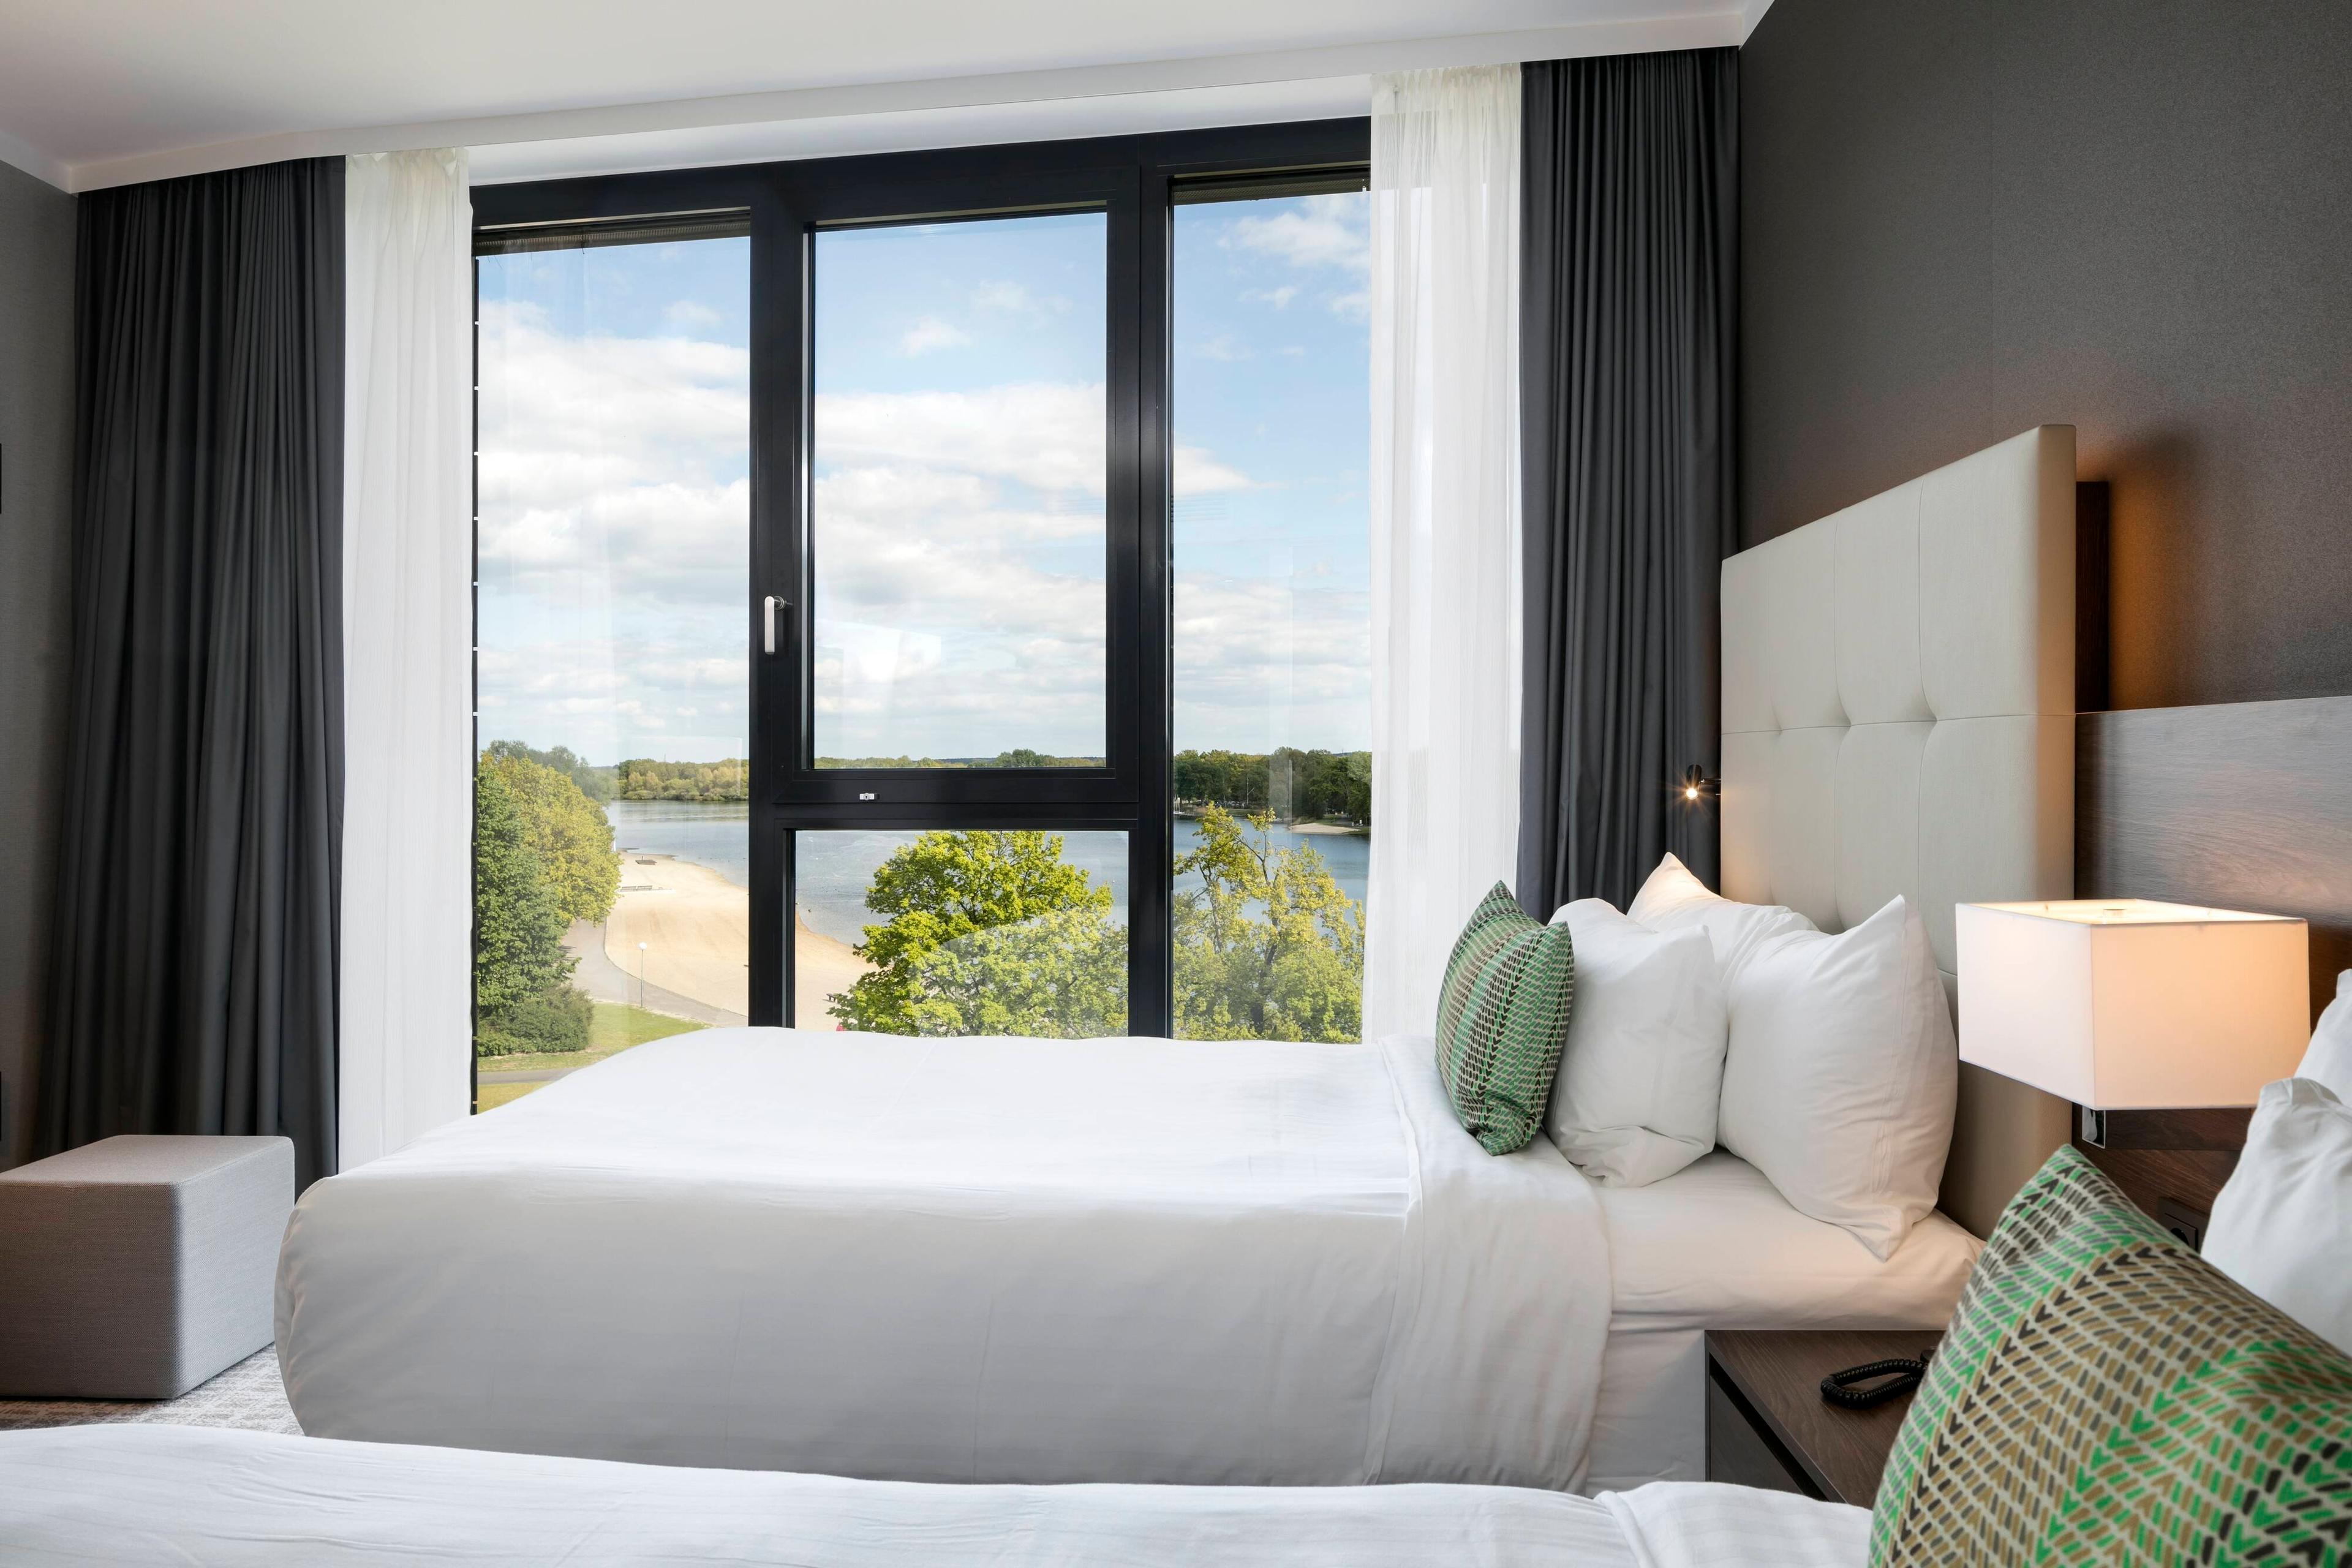 Our lake view rooms have spectacular views over the Lake Allersee, also available with connecting doors for more space during your stay.